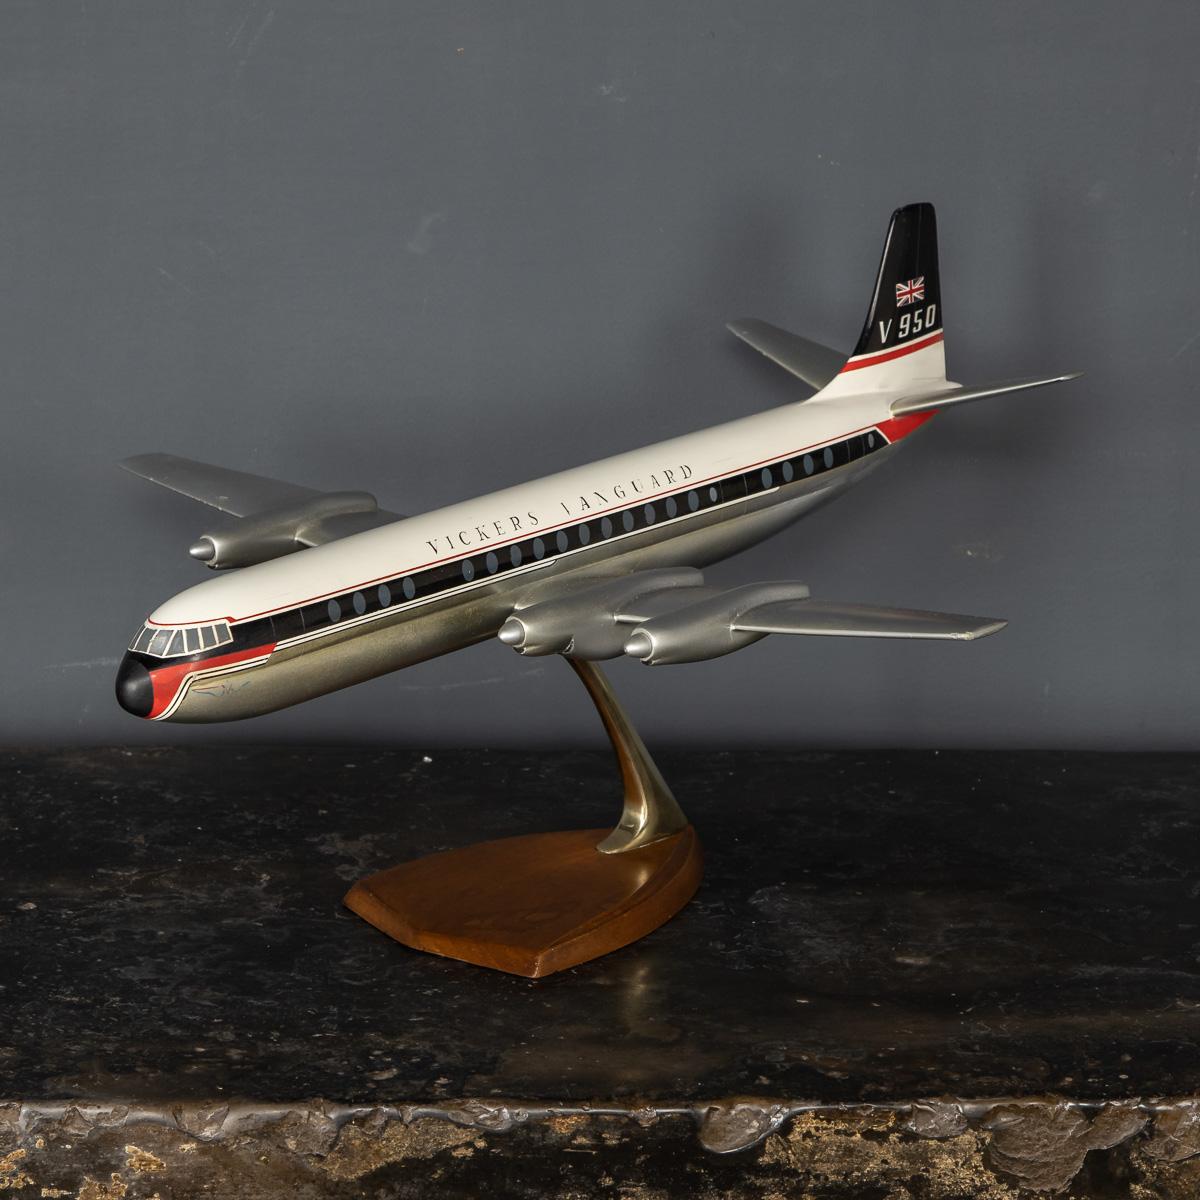 A Stunning 20th Century model of a painted metal model of the Vickers Vanguard turbo prop airline from the late 1960's.

CONDITION
In Great condition - No damage, just general wear.

SIZE
Depth: 52cm
Width: 49cm
Height: 30cm.